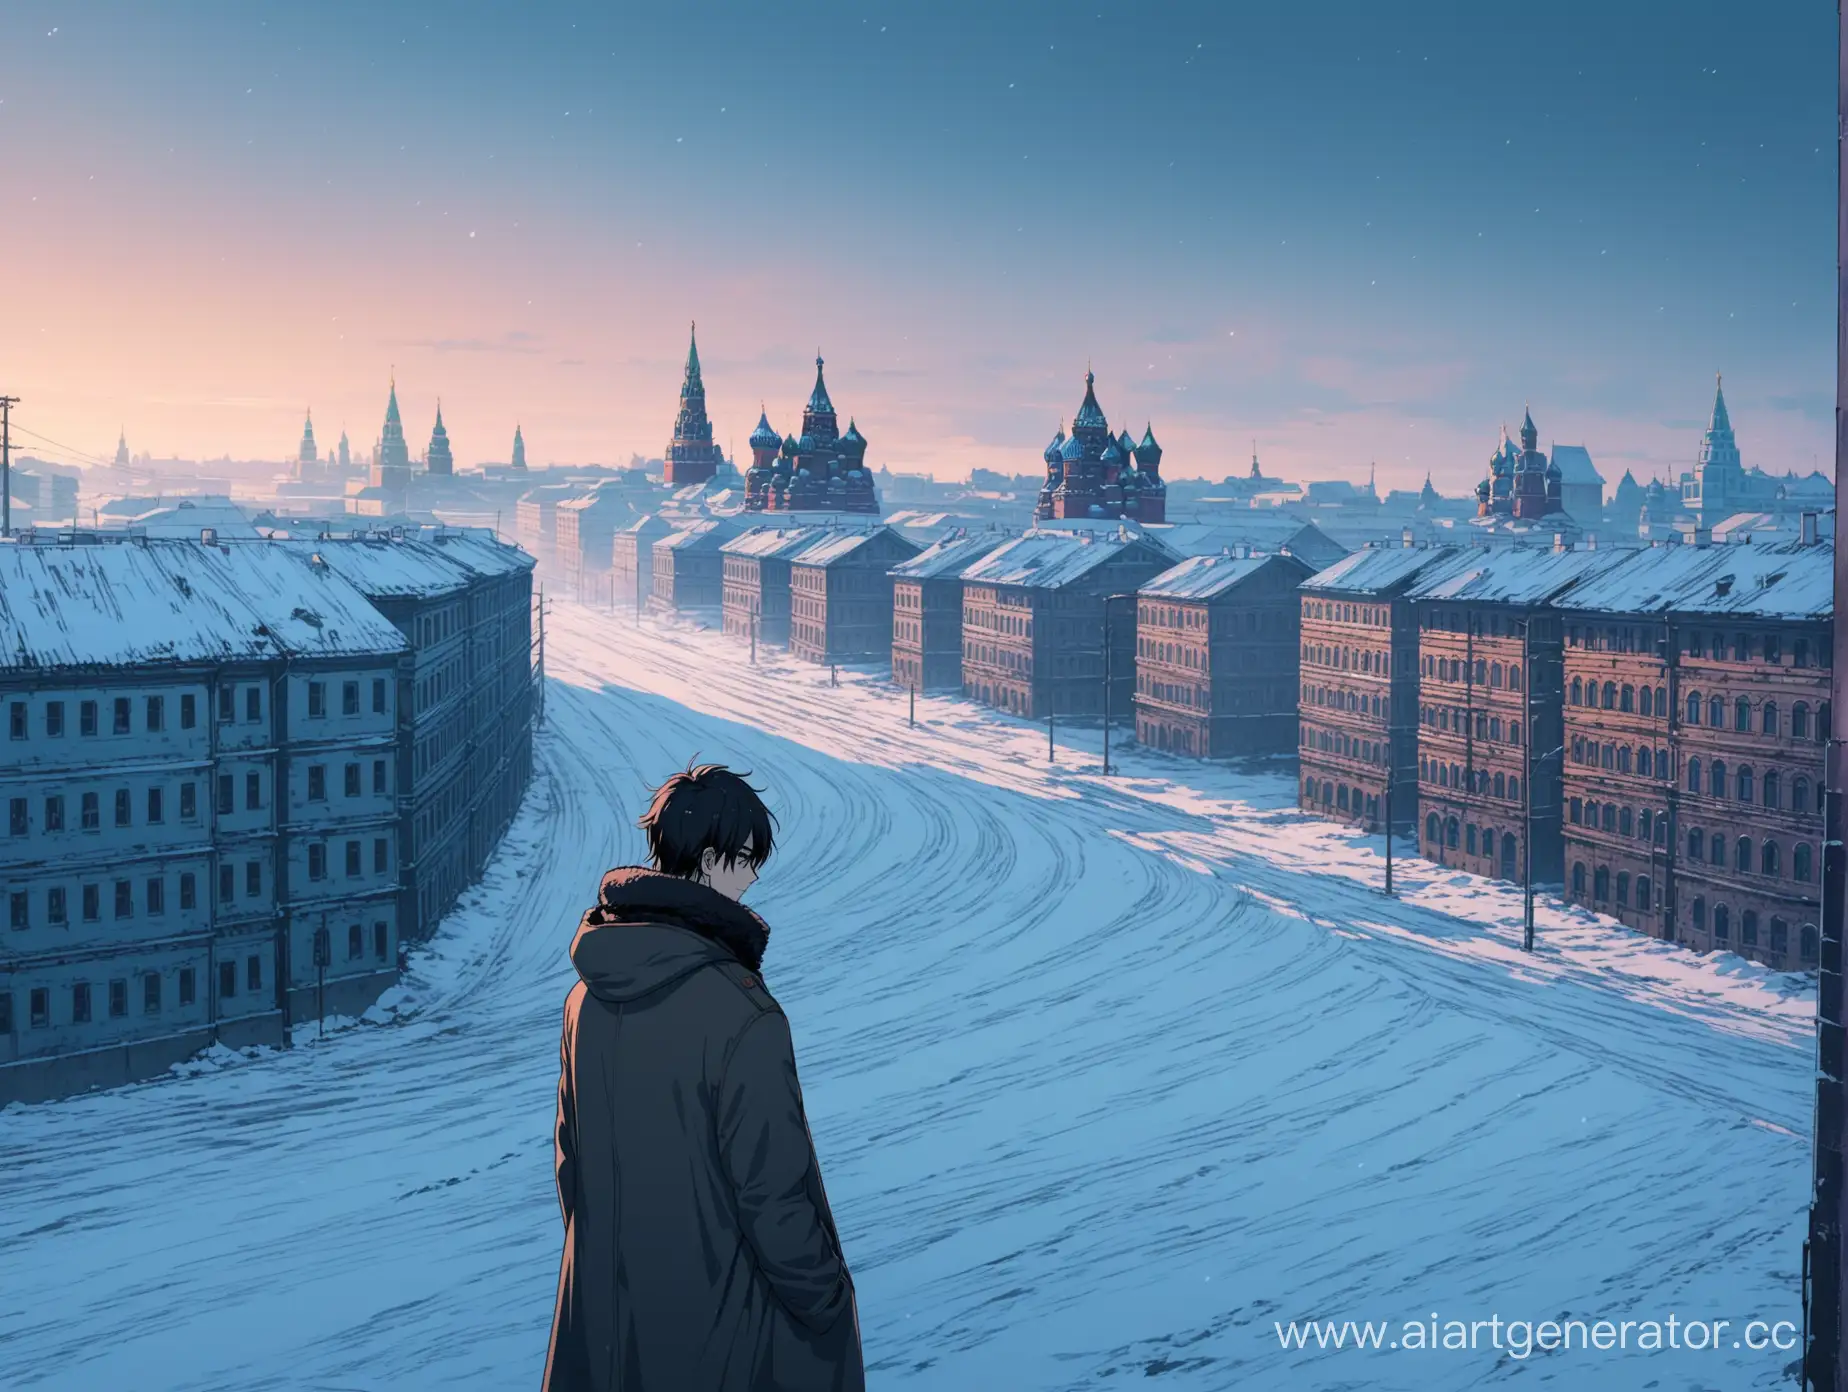 Brooding-Anime-Protagonist-in-Snowy-Russian-Cityscape